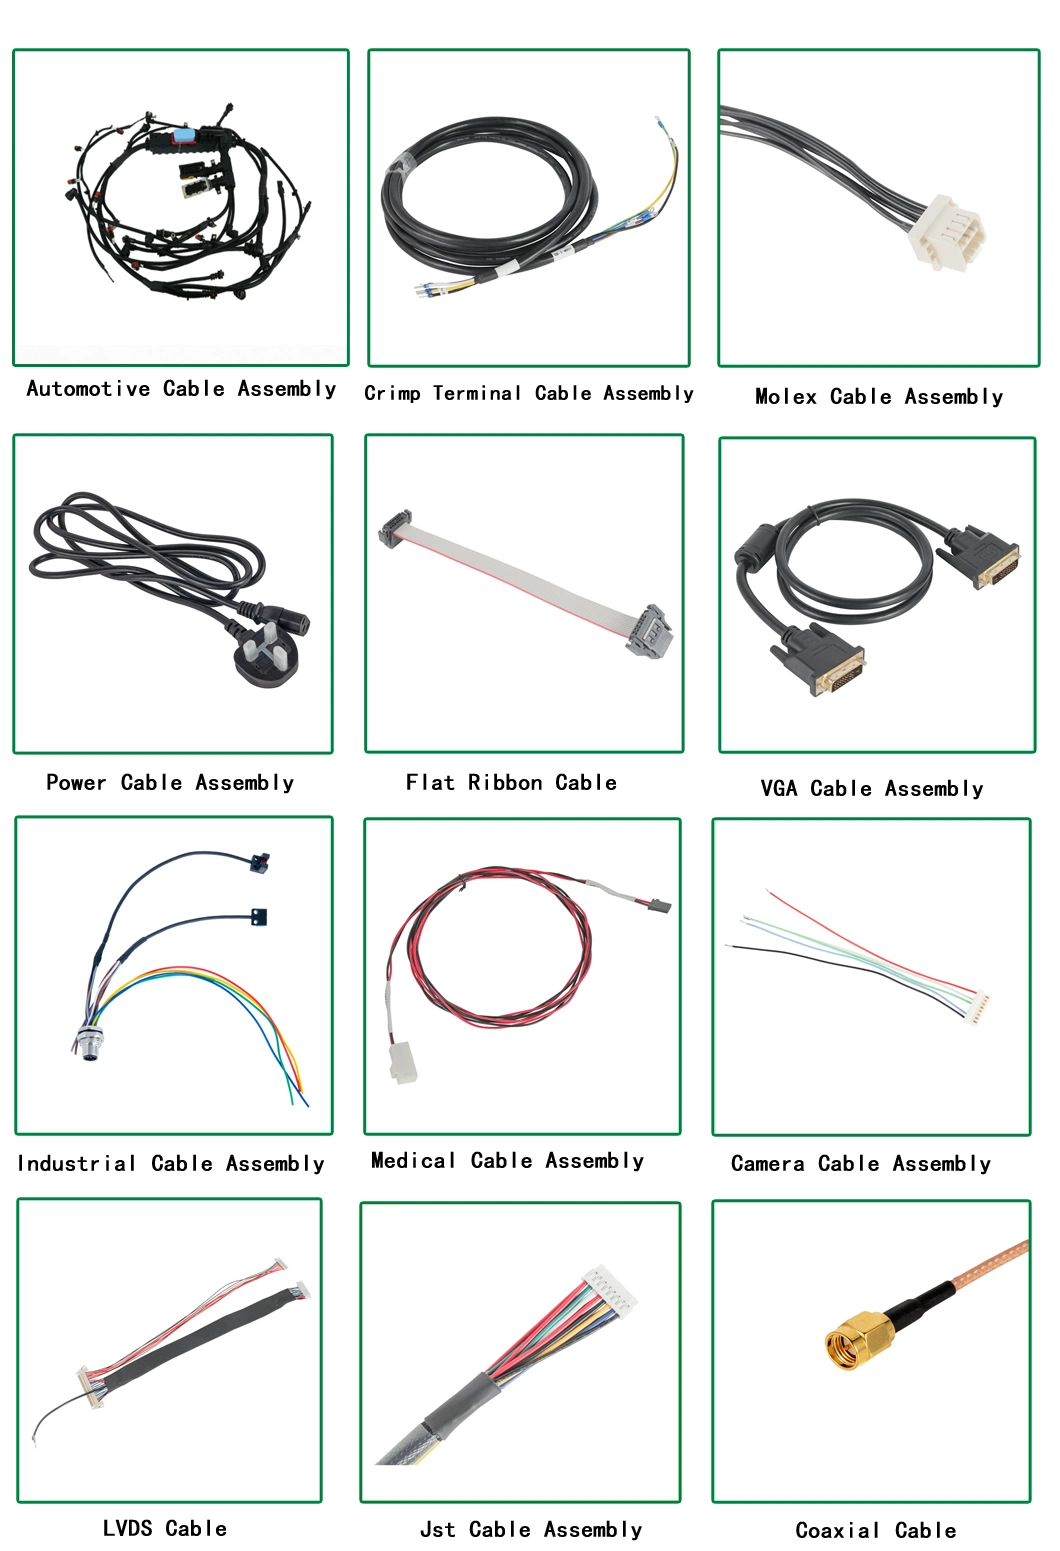 Industrial Cable Assembly Wiring Harness for Automation Automotive Wire Harness